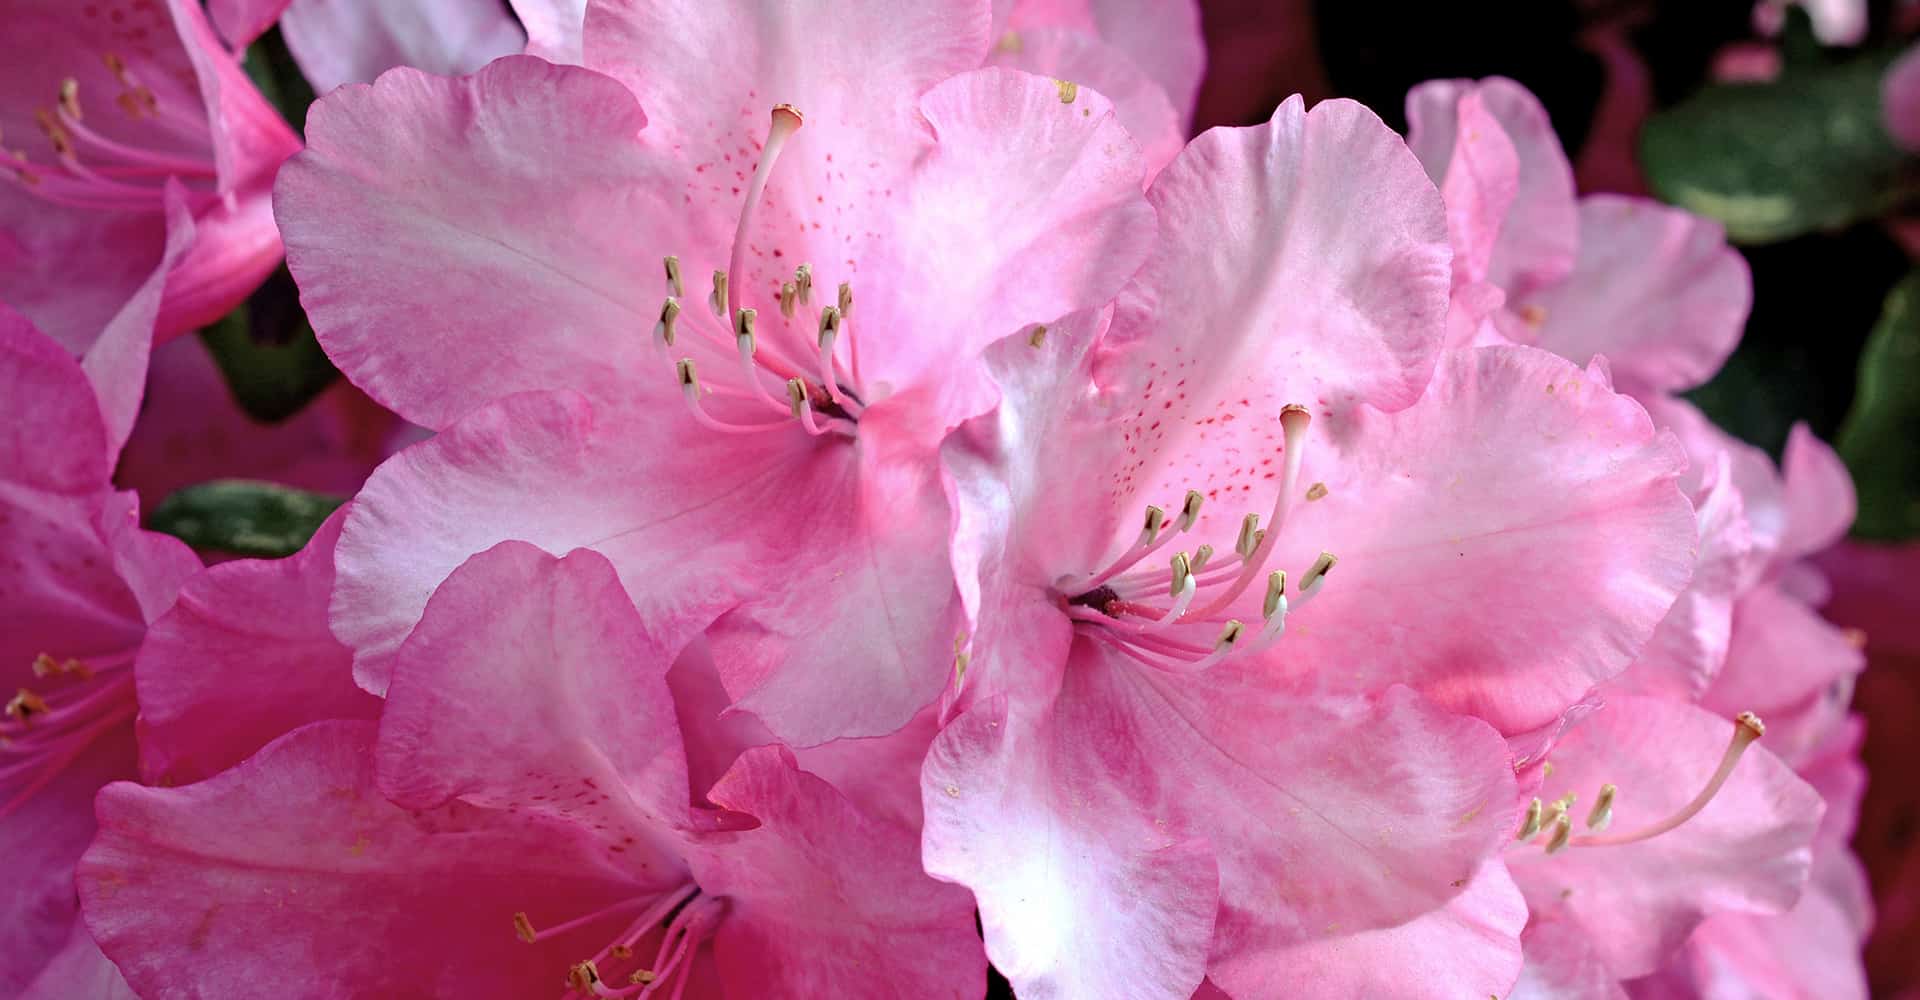 Rhododendron Care Guide: How To Grow This Spring-Flowering Shrub